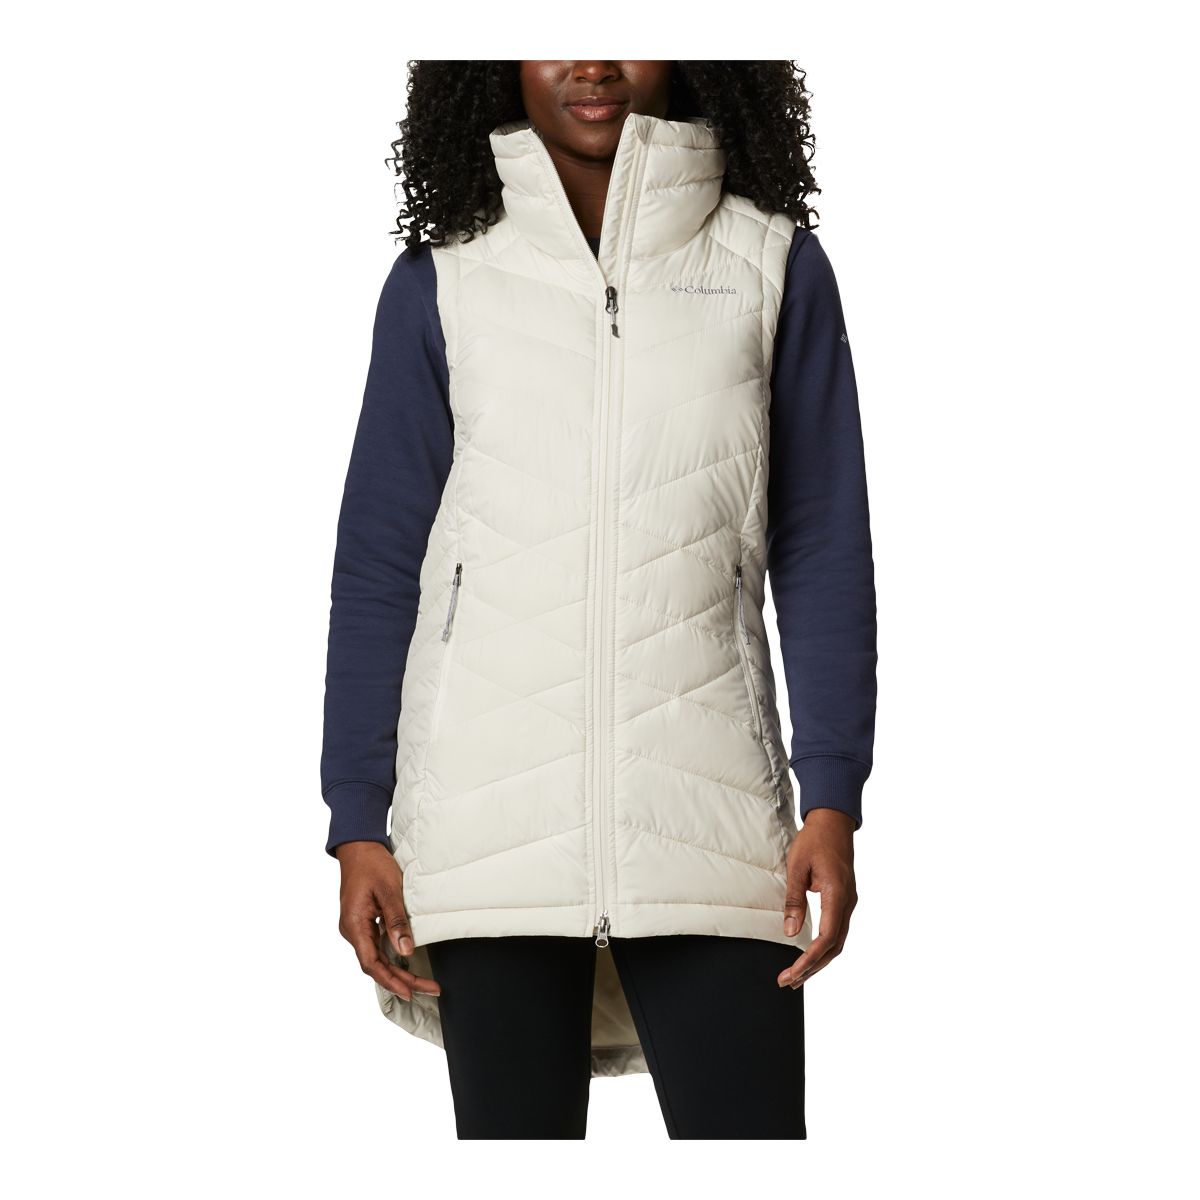 Image of Columbia Women's Heavenly Vest Insulated Semi-Fitted Winter Long